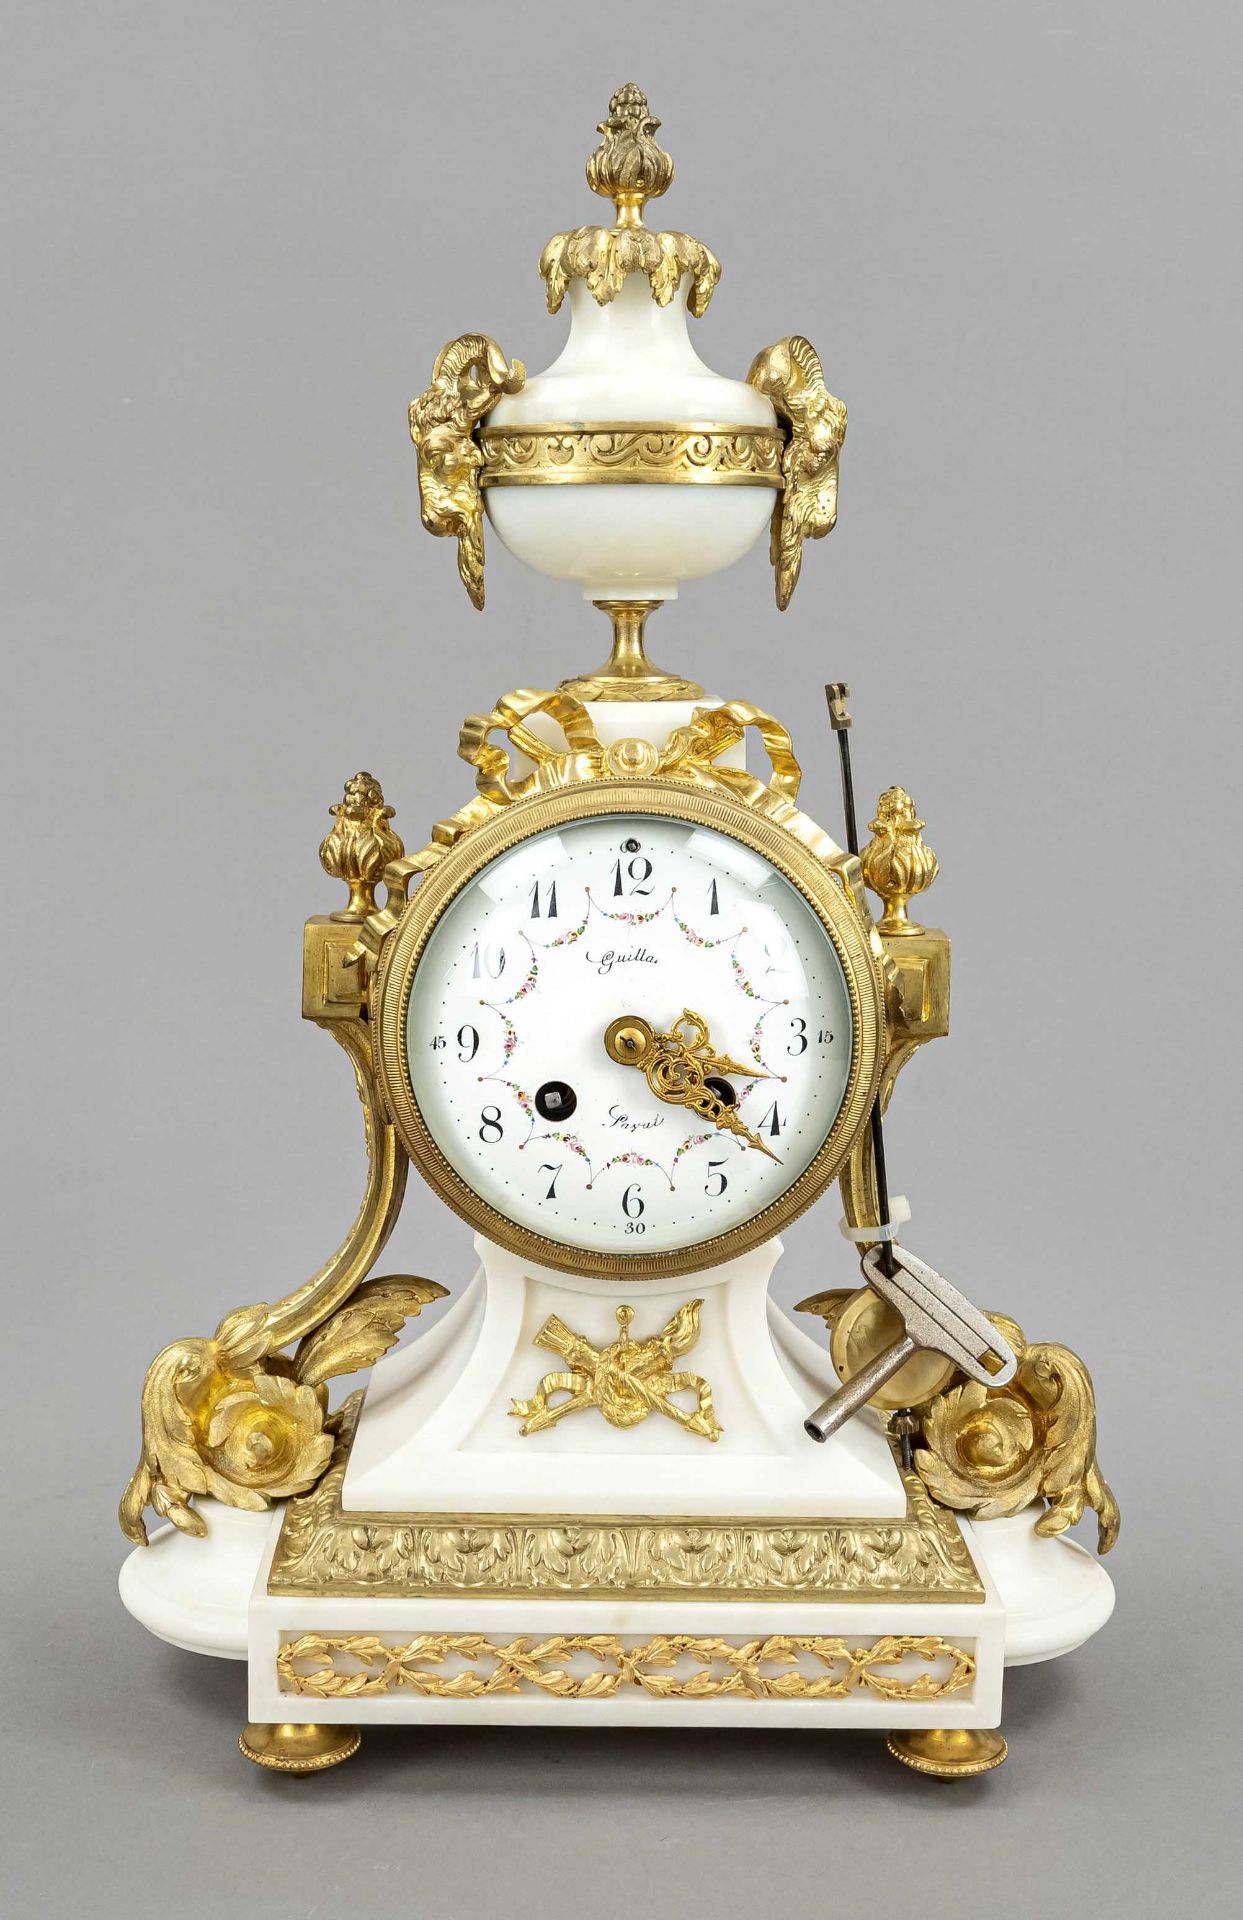 Marble pendule Louis Seize, fire gilded, 2.H.19.c., white marble with gilded bronze applications,